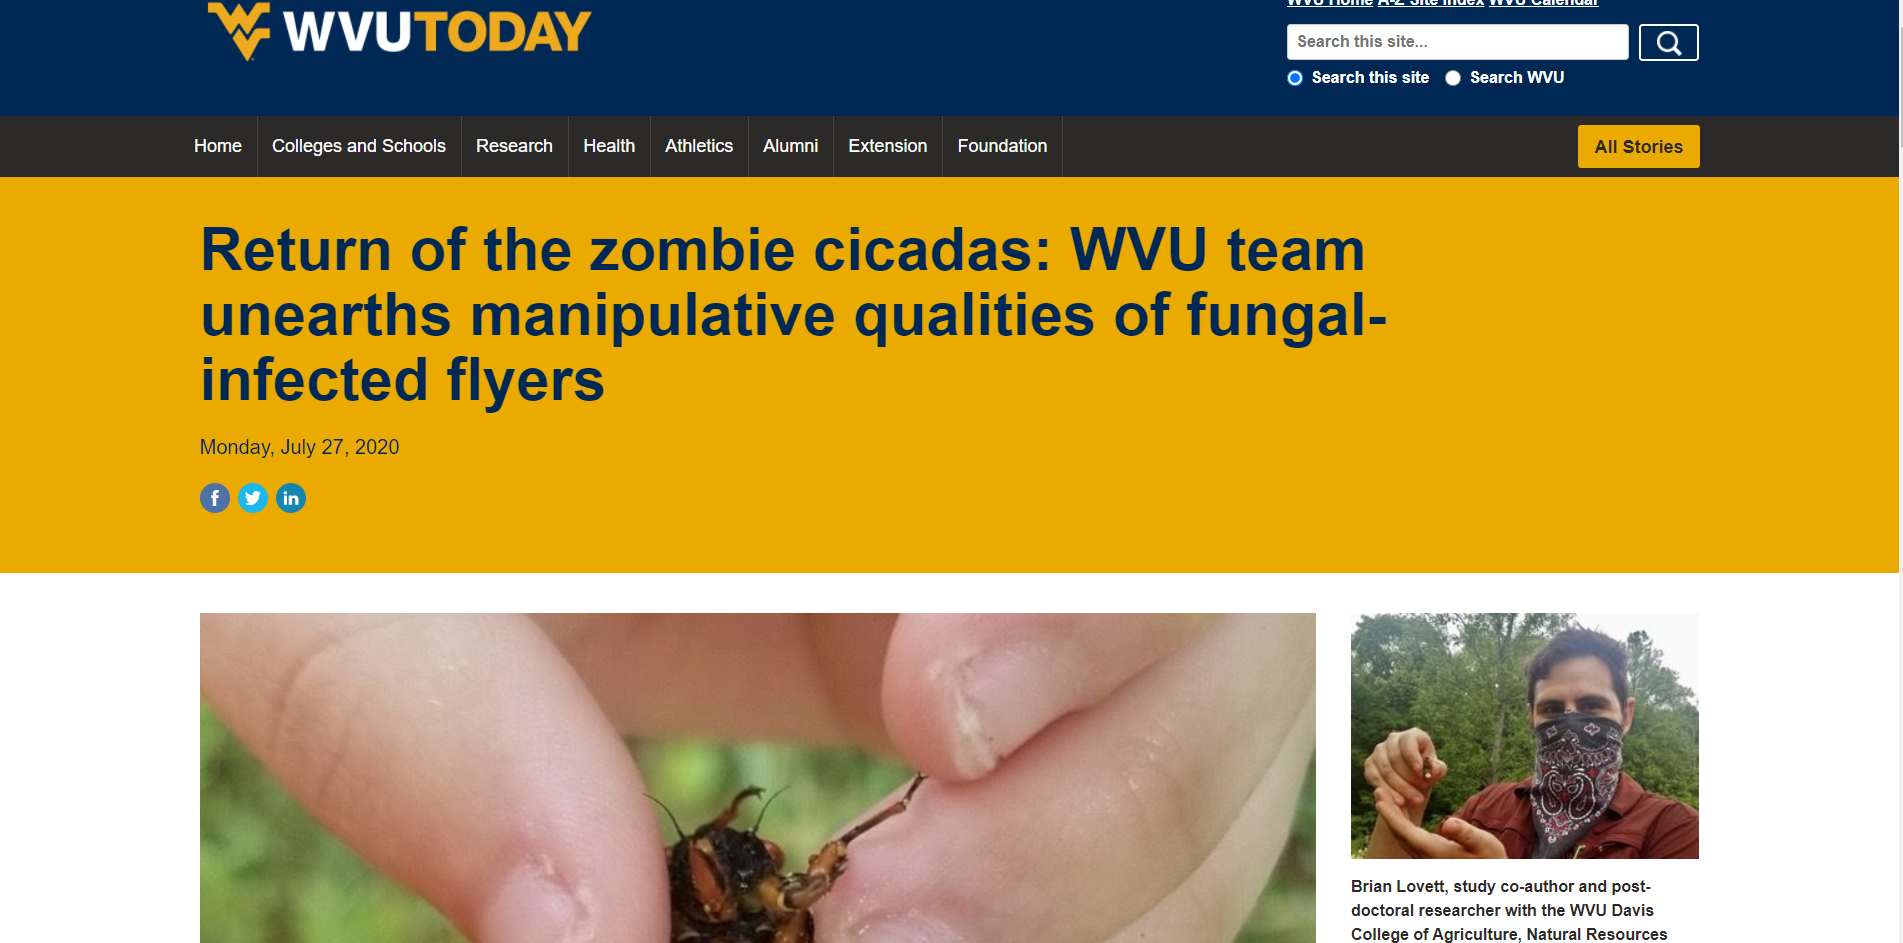 Return-of-the-zombie-cicadas-WVU-team-unearths-manipulative-qualities-of-fungal-infected-flyers-WVU-Today-West-Virginia-University